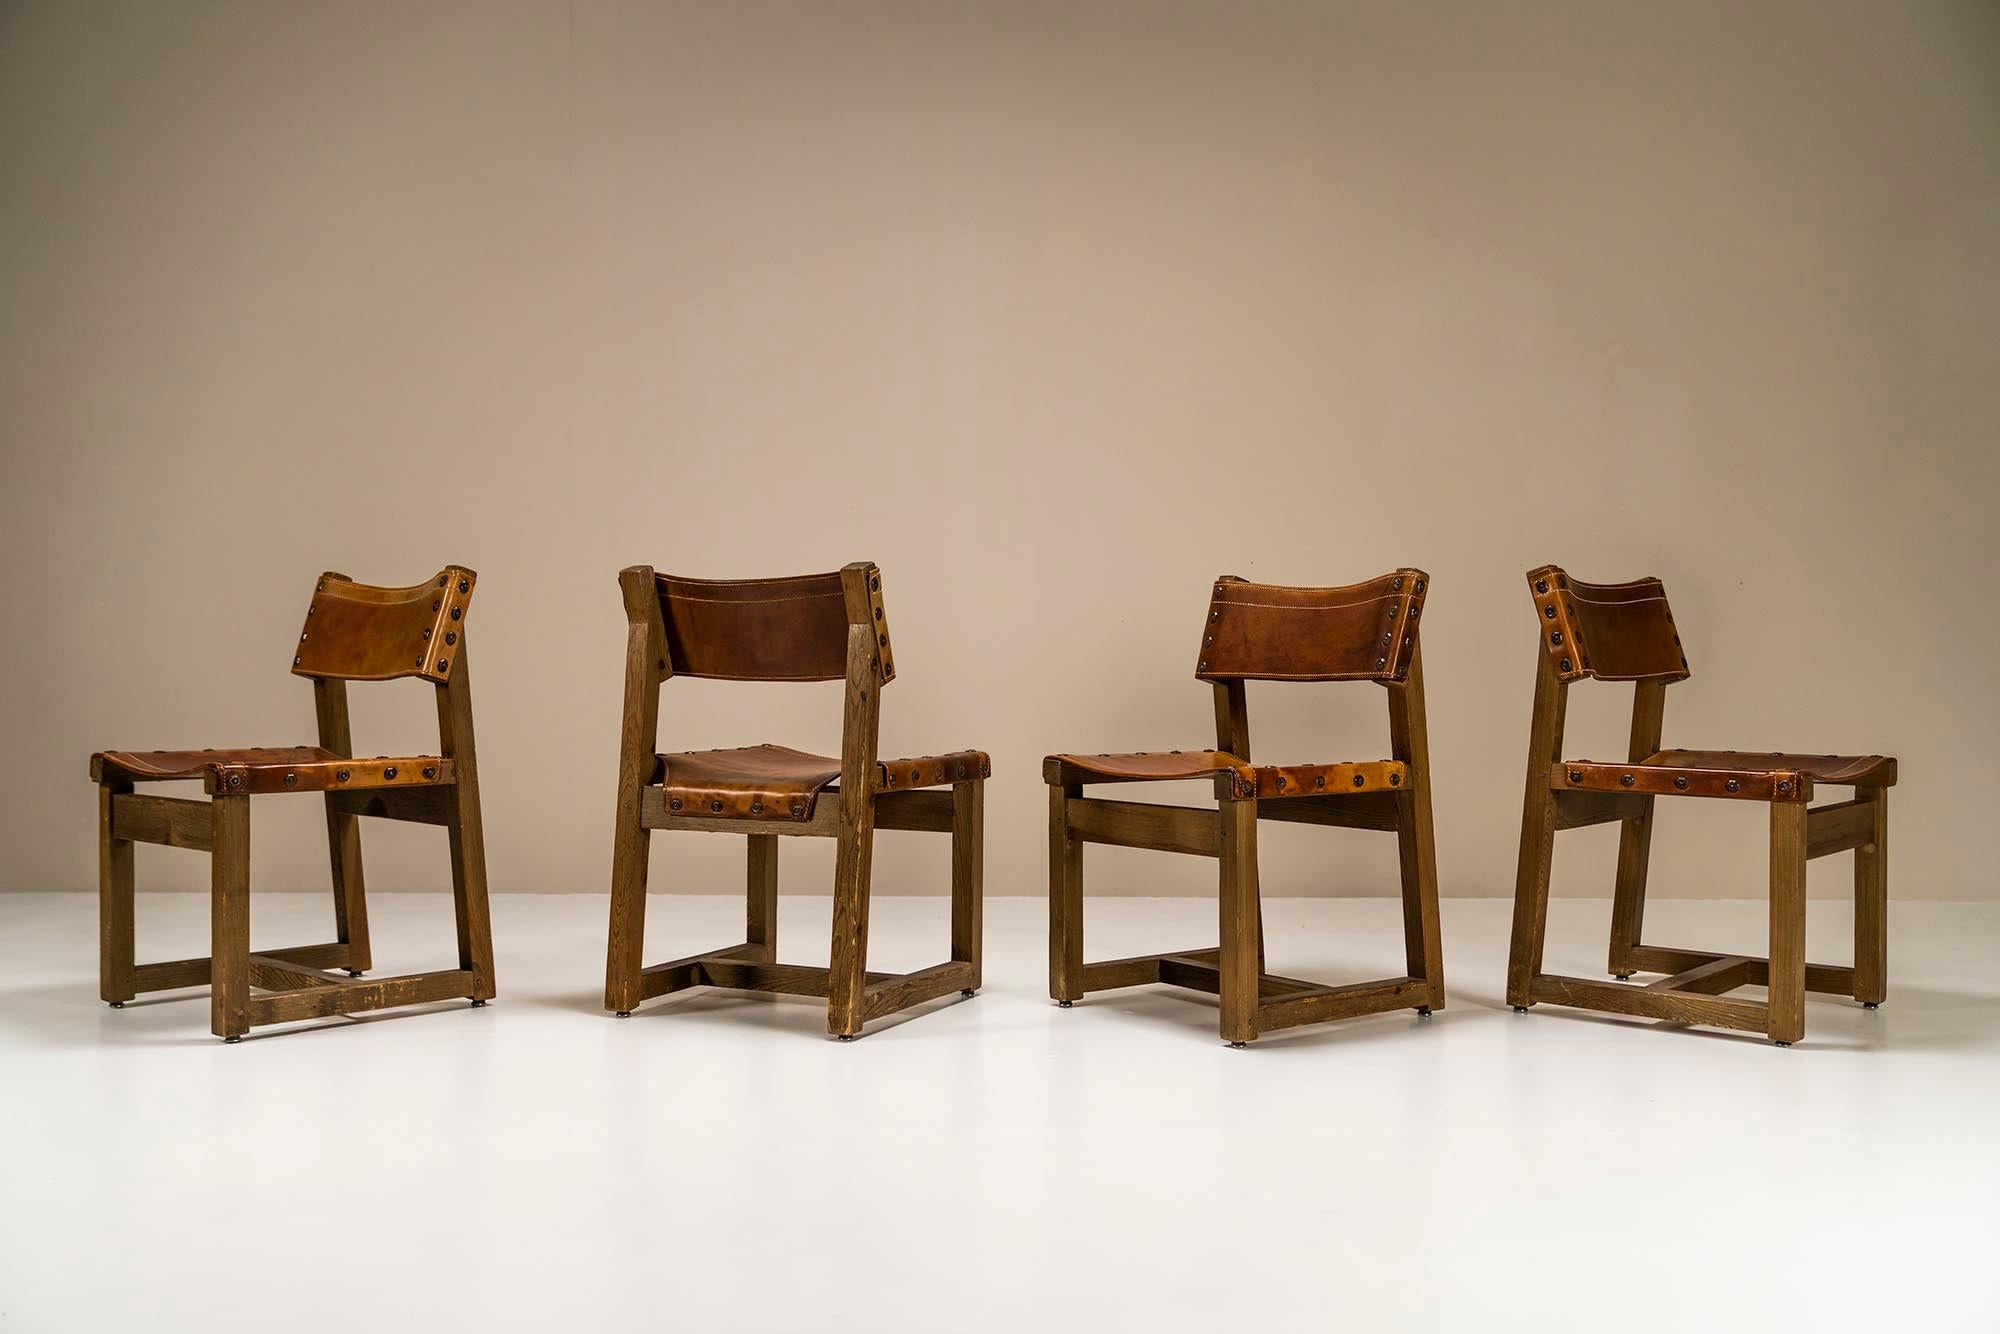 Mid-Century Modern Biosca Set of 4 Chairs in Pine and Cognac Saddle Leather, Spain, 1960s For Sale